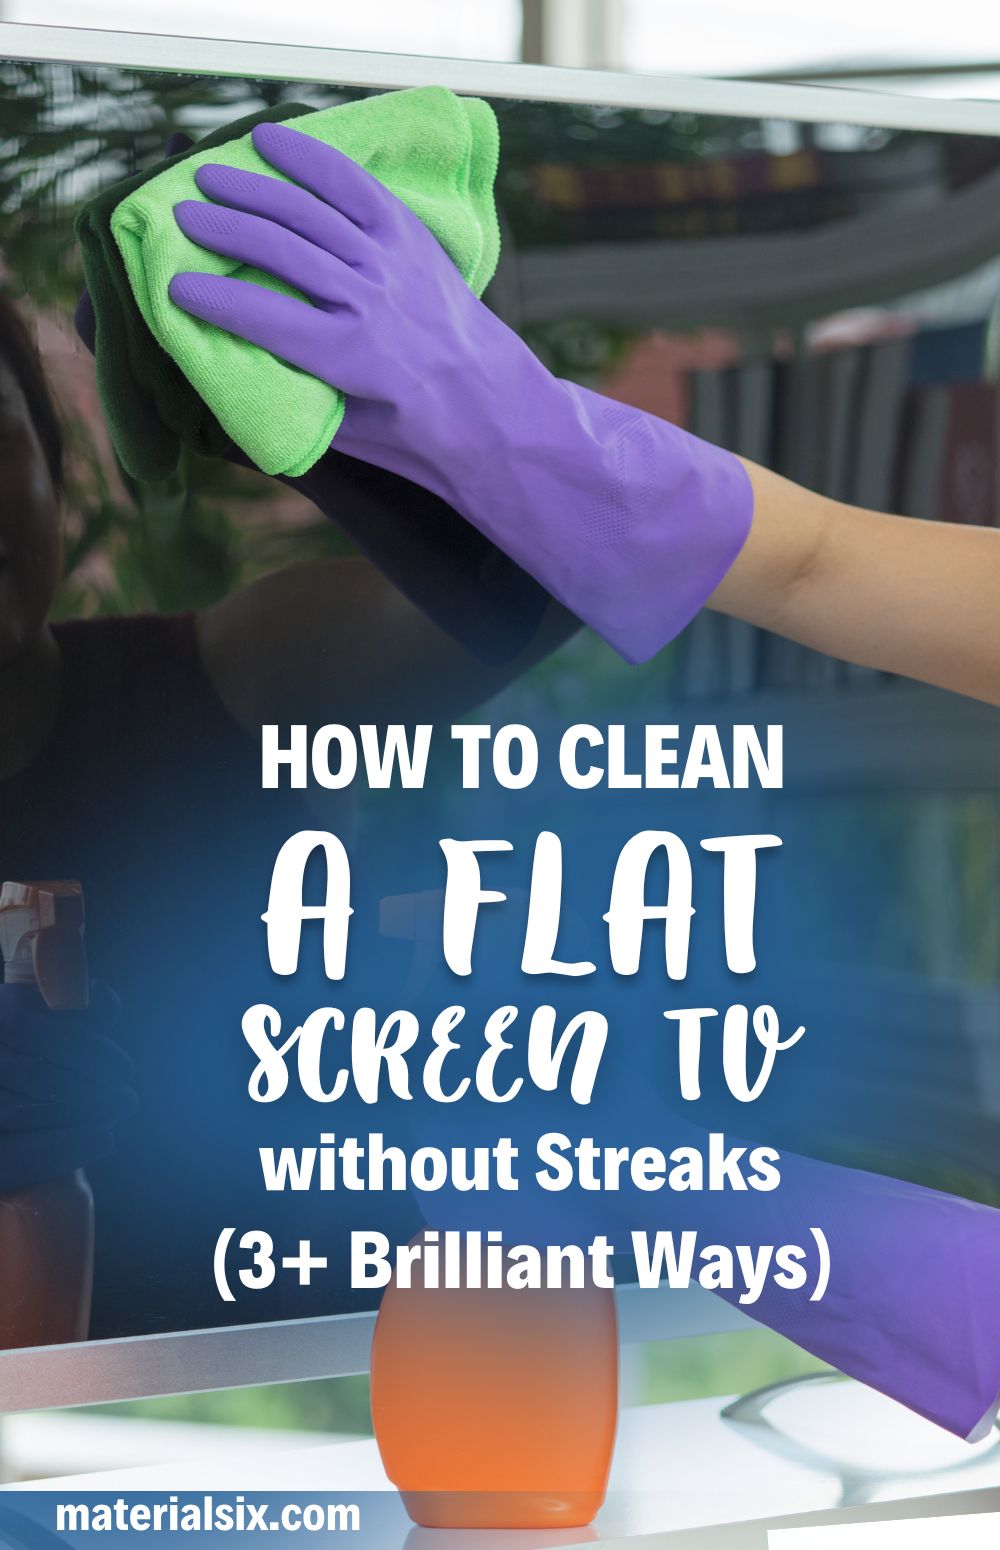 How to Clean a Flat Screen TV without Streaks